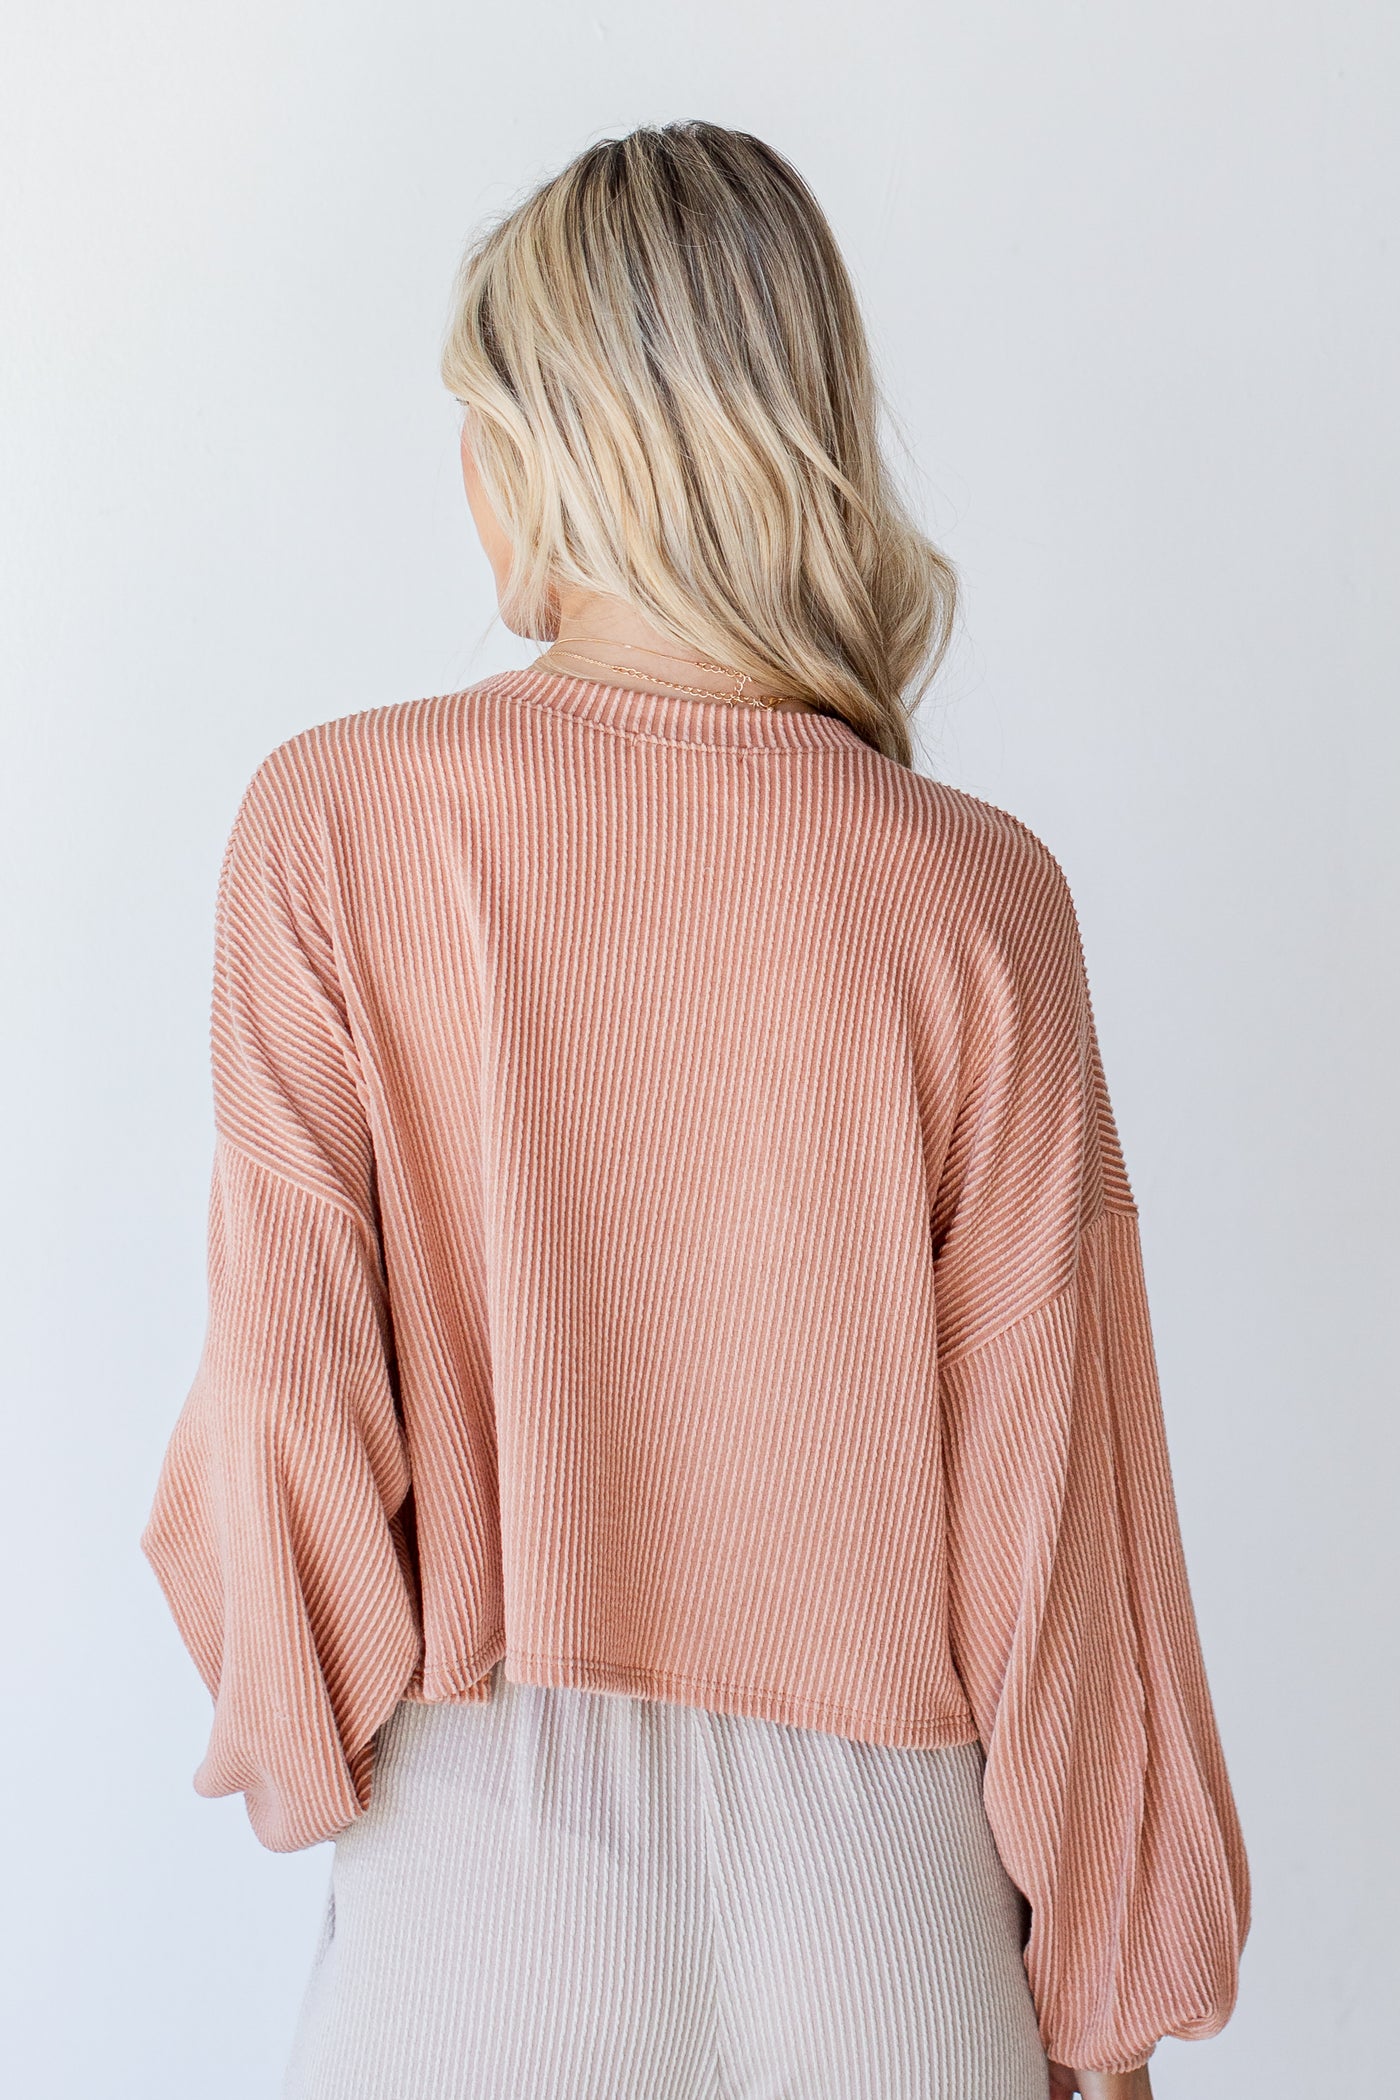 Cropped Corded Pullover in peach back view